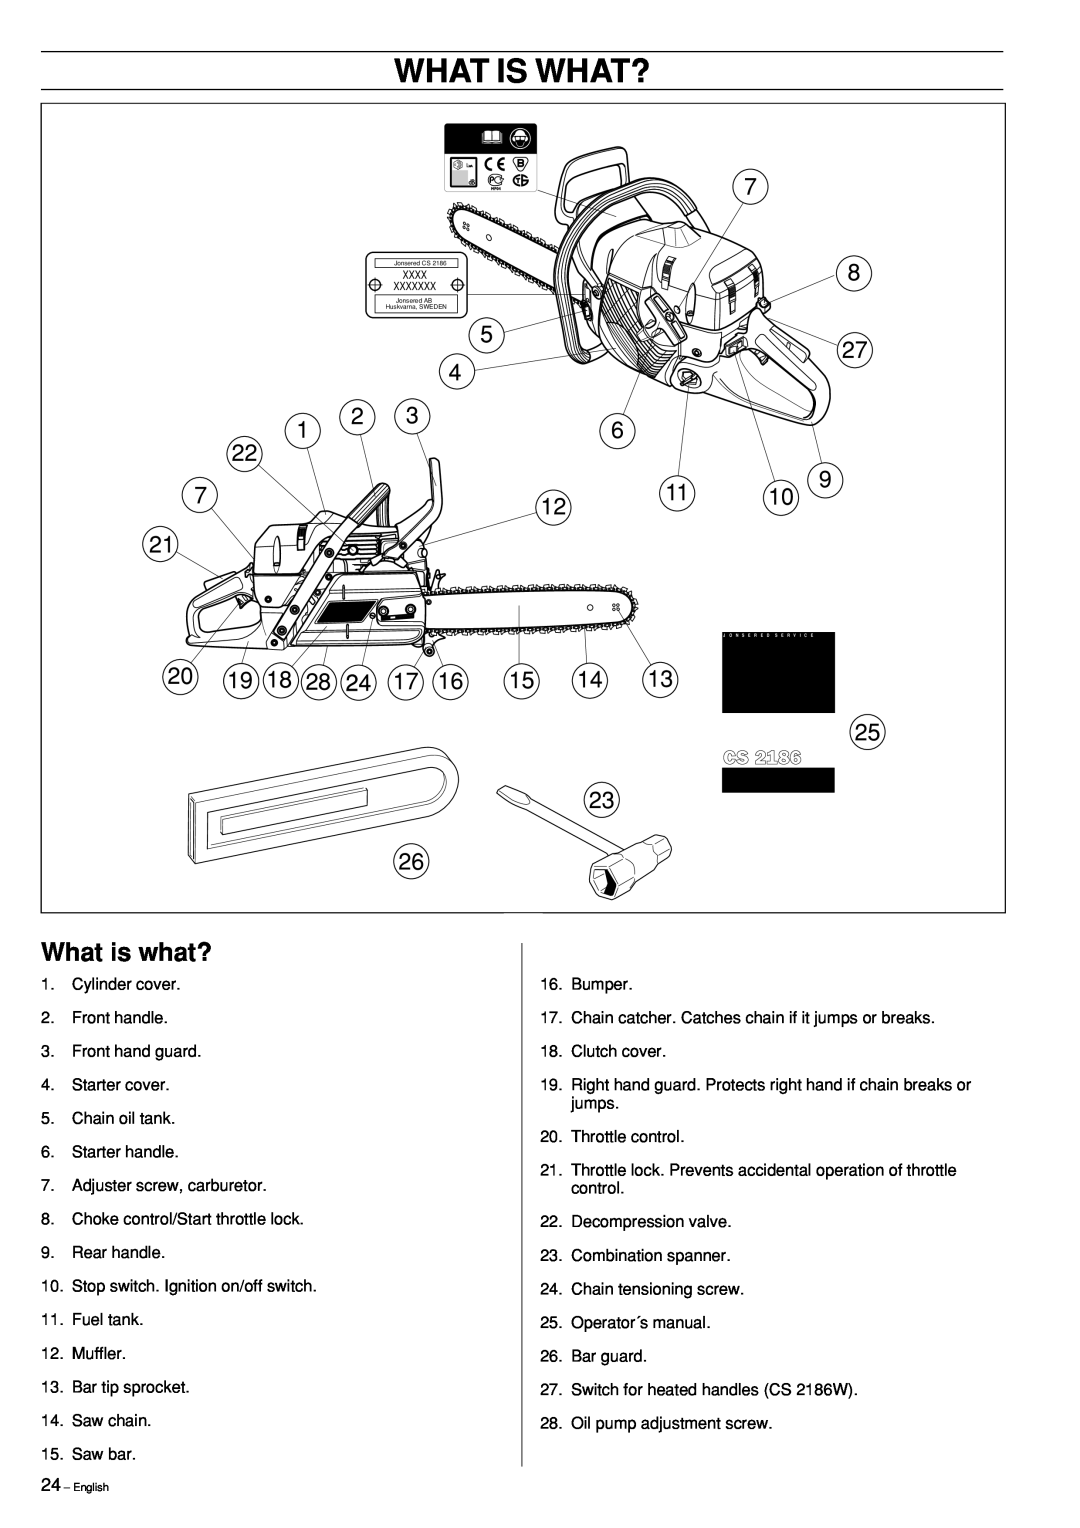 Jonsered CS 2186 manual What Is What?, What is what? 